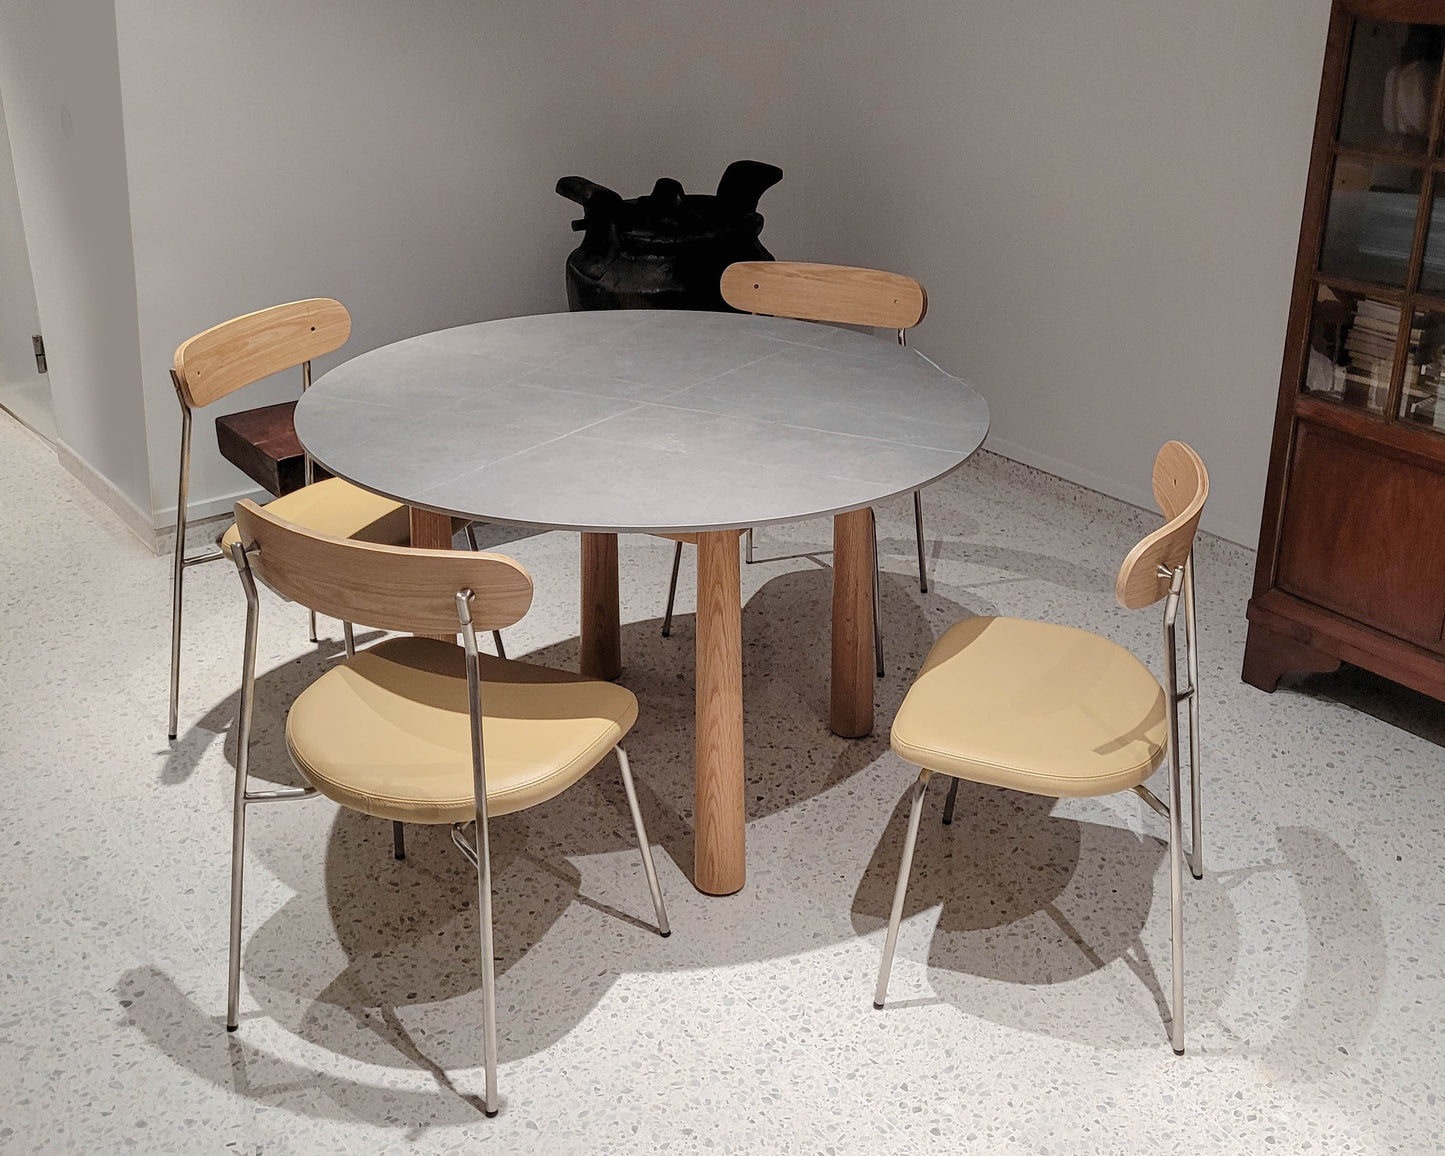 Tables Bulbul Tiong Round Dining Table in Solid Oakwood Base